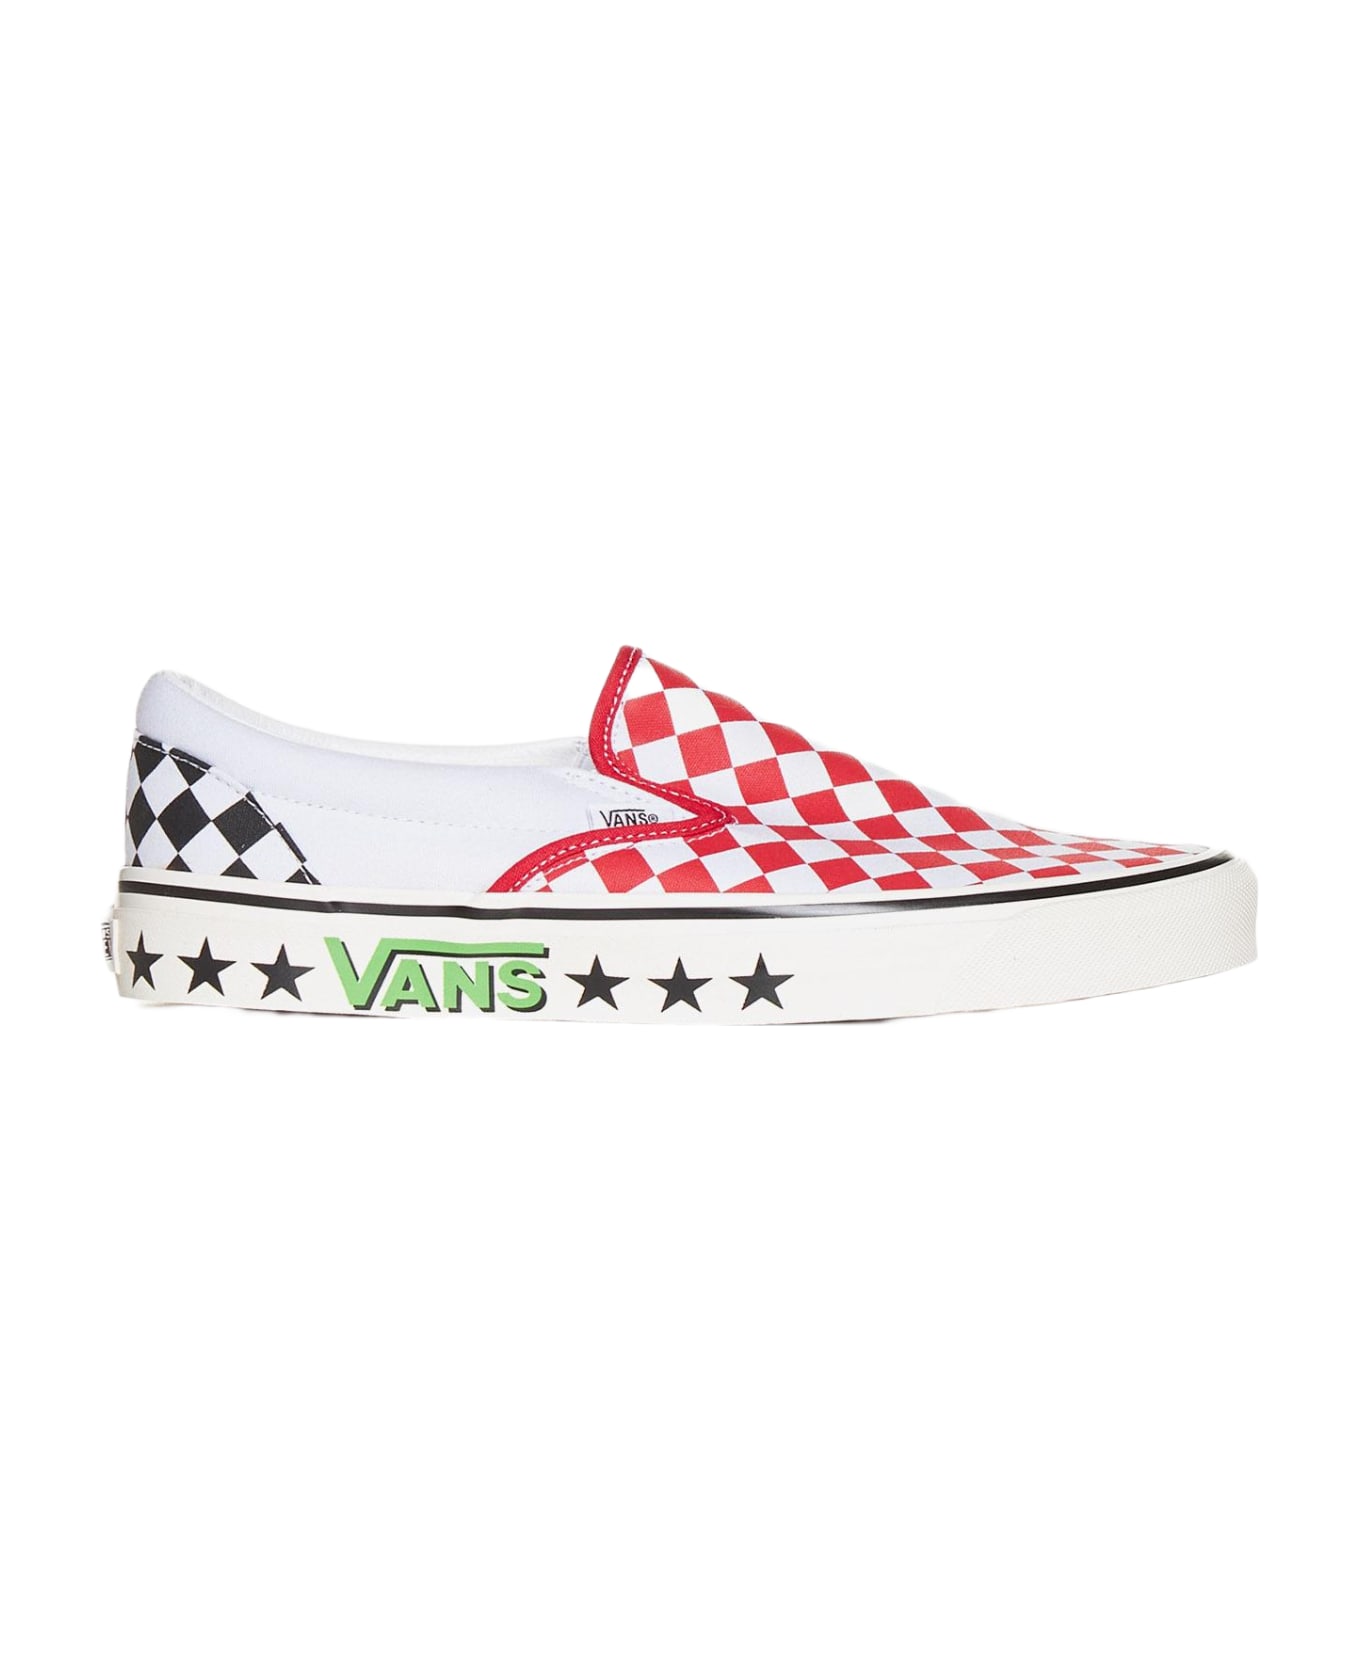 Vans Classic Slip-on 98 Dx Canvas Sneakers - Red/white